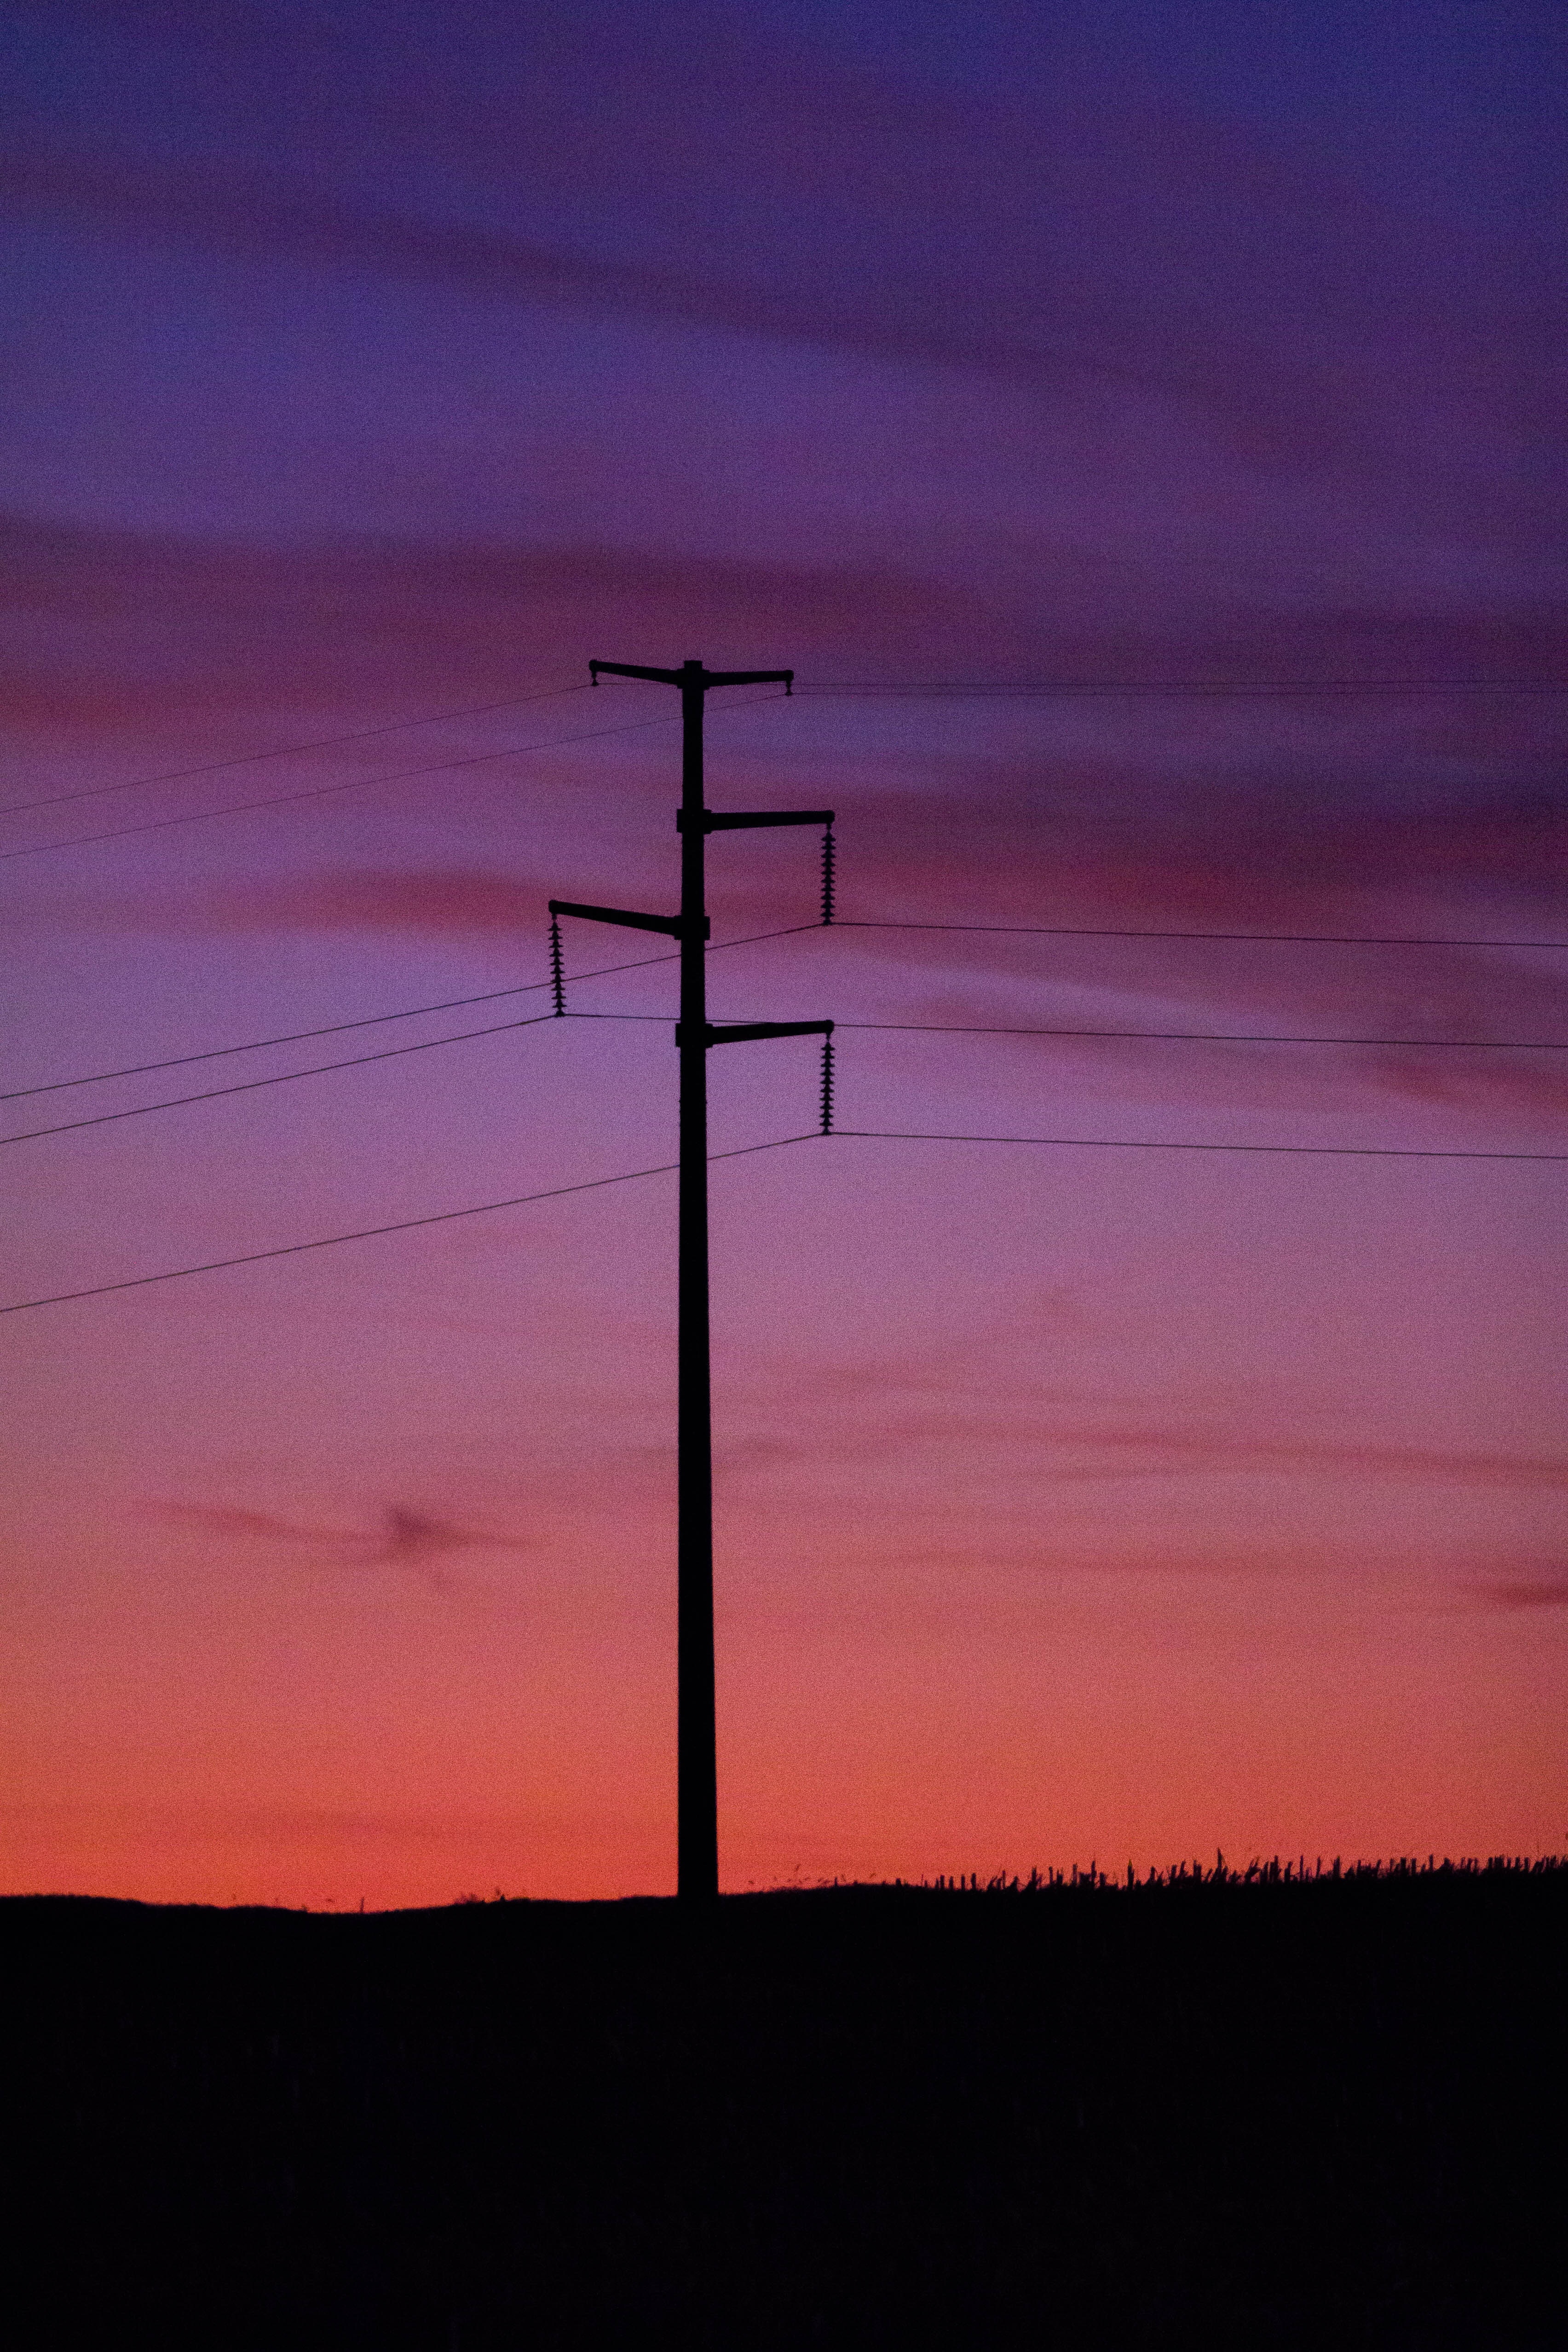 wires, nature, sunset, sky, post, pillar, wire Phone Background